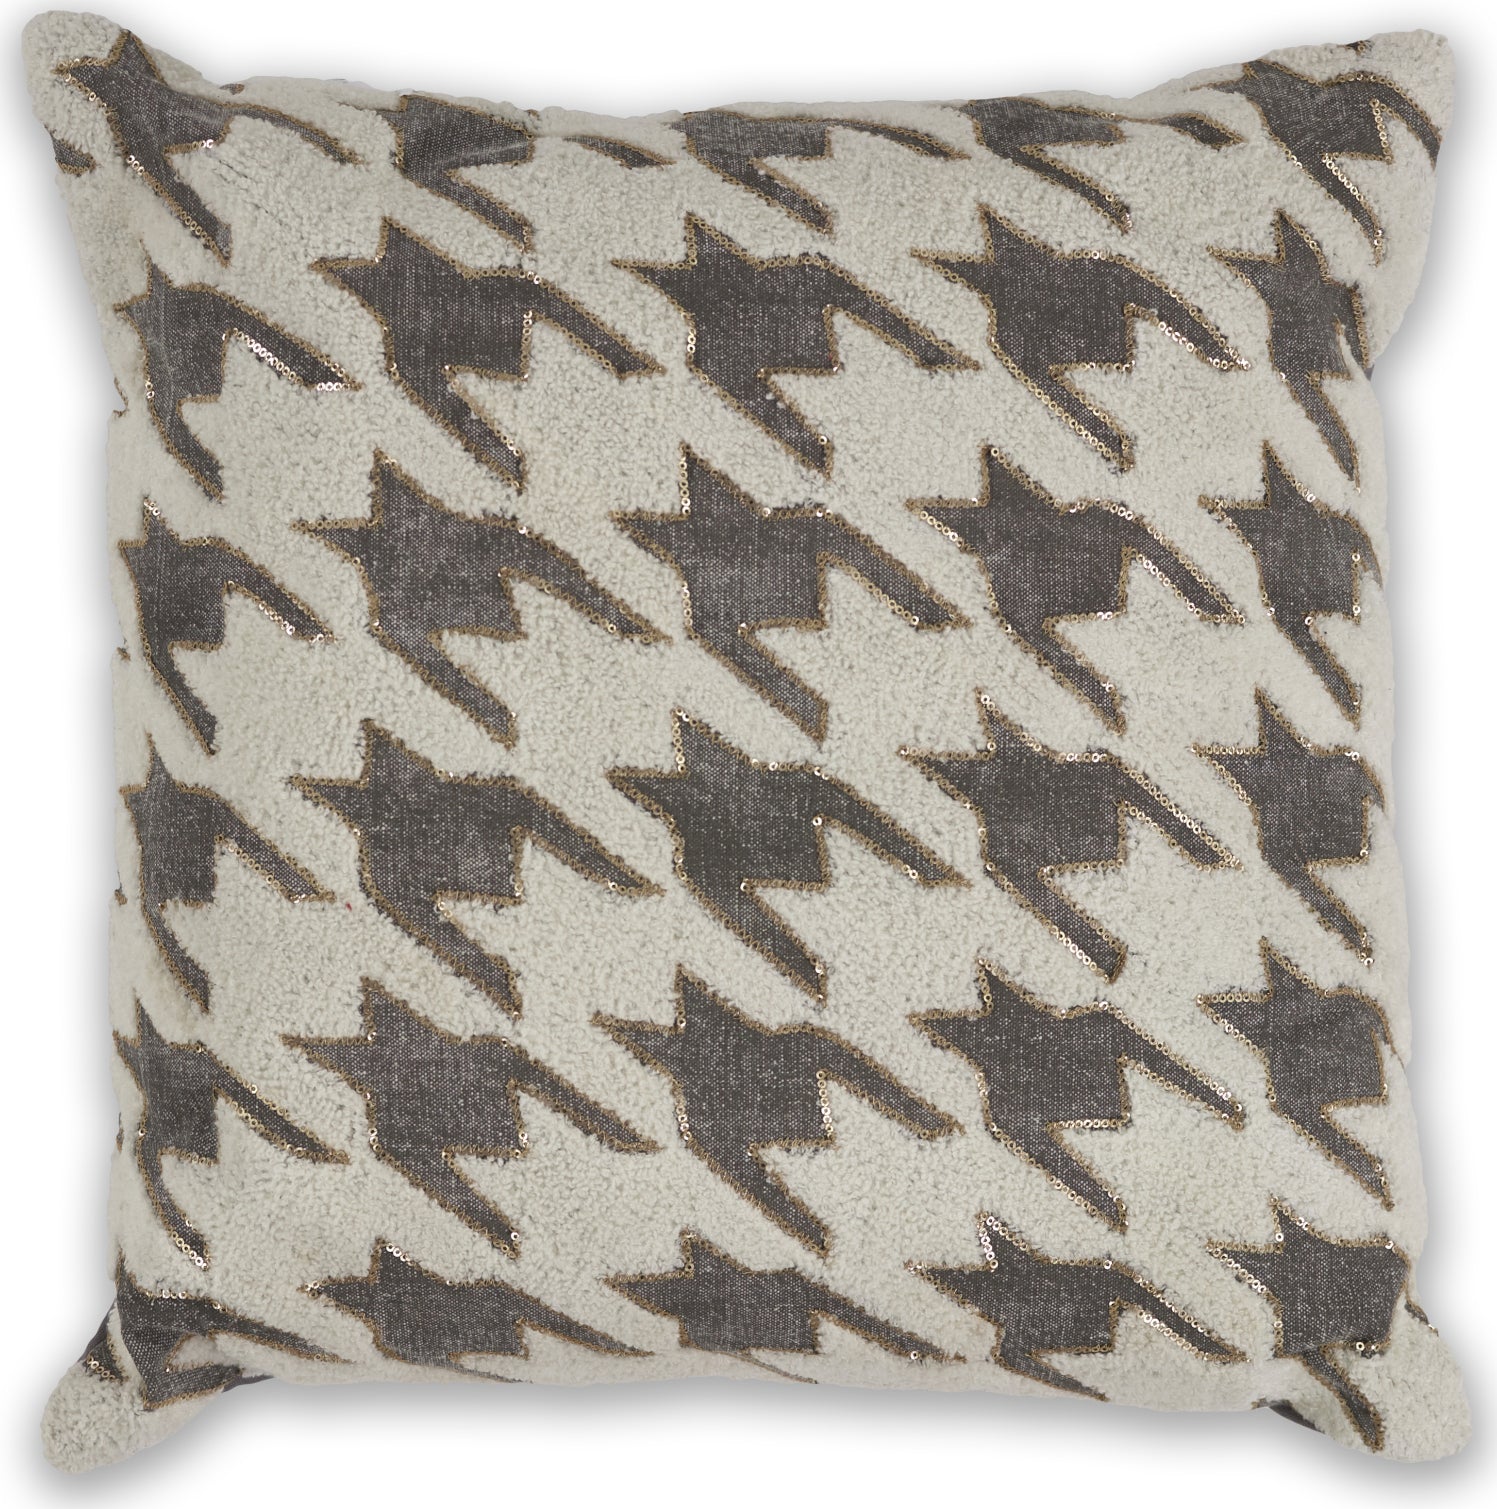 KAS Pillow L323 Ivory/Grey Houndstooth main image